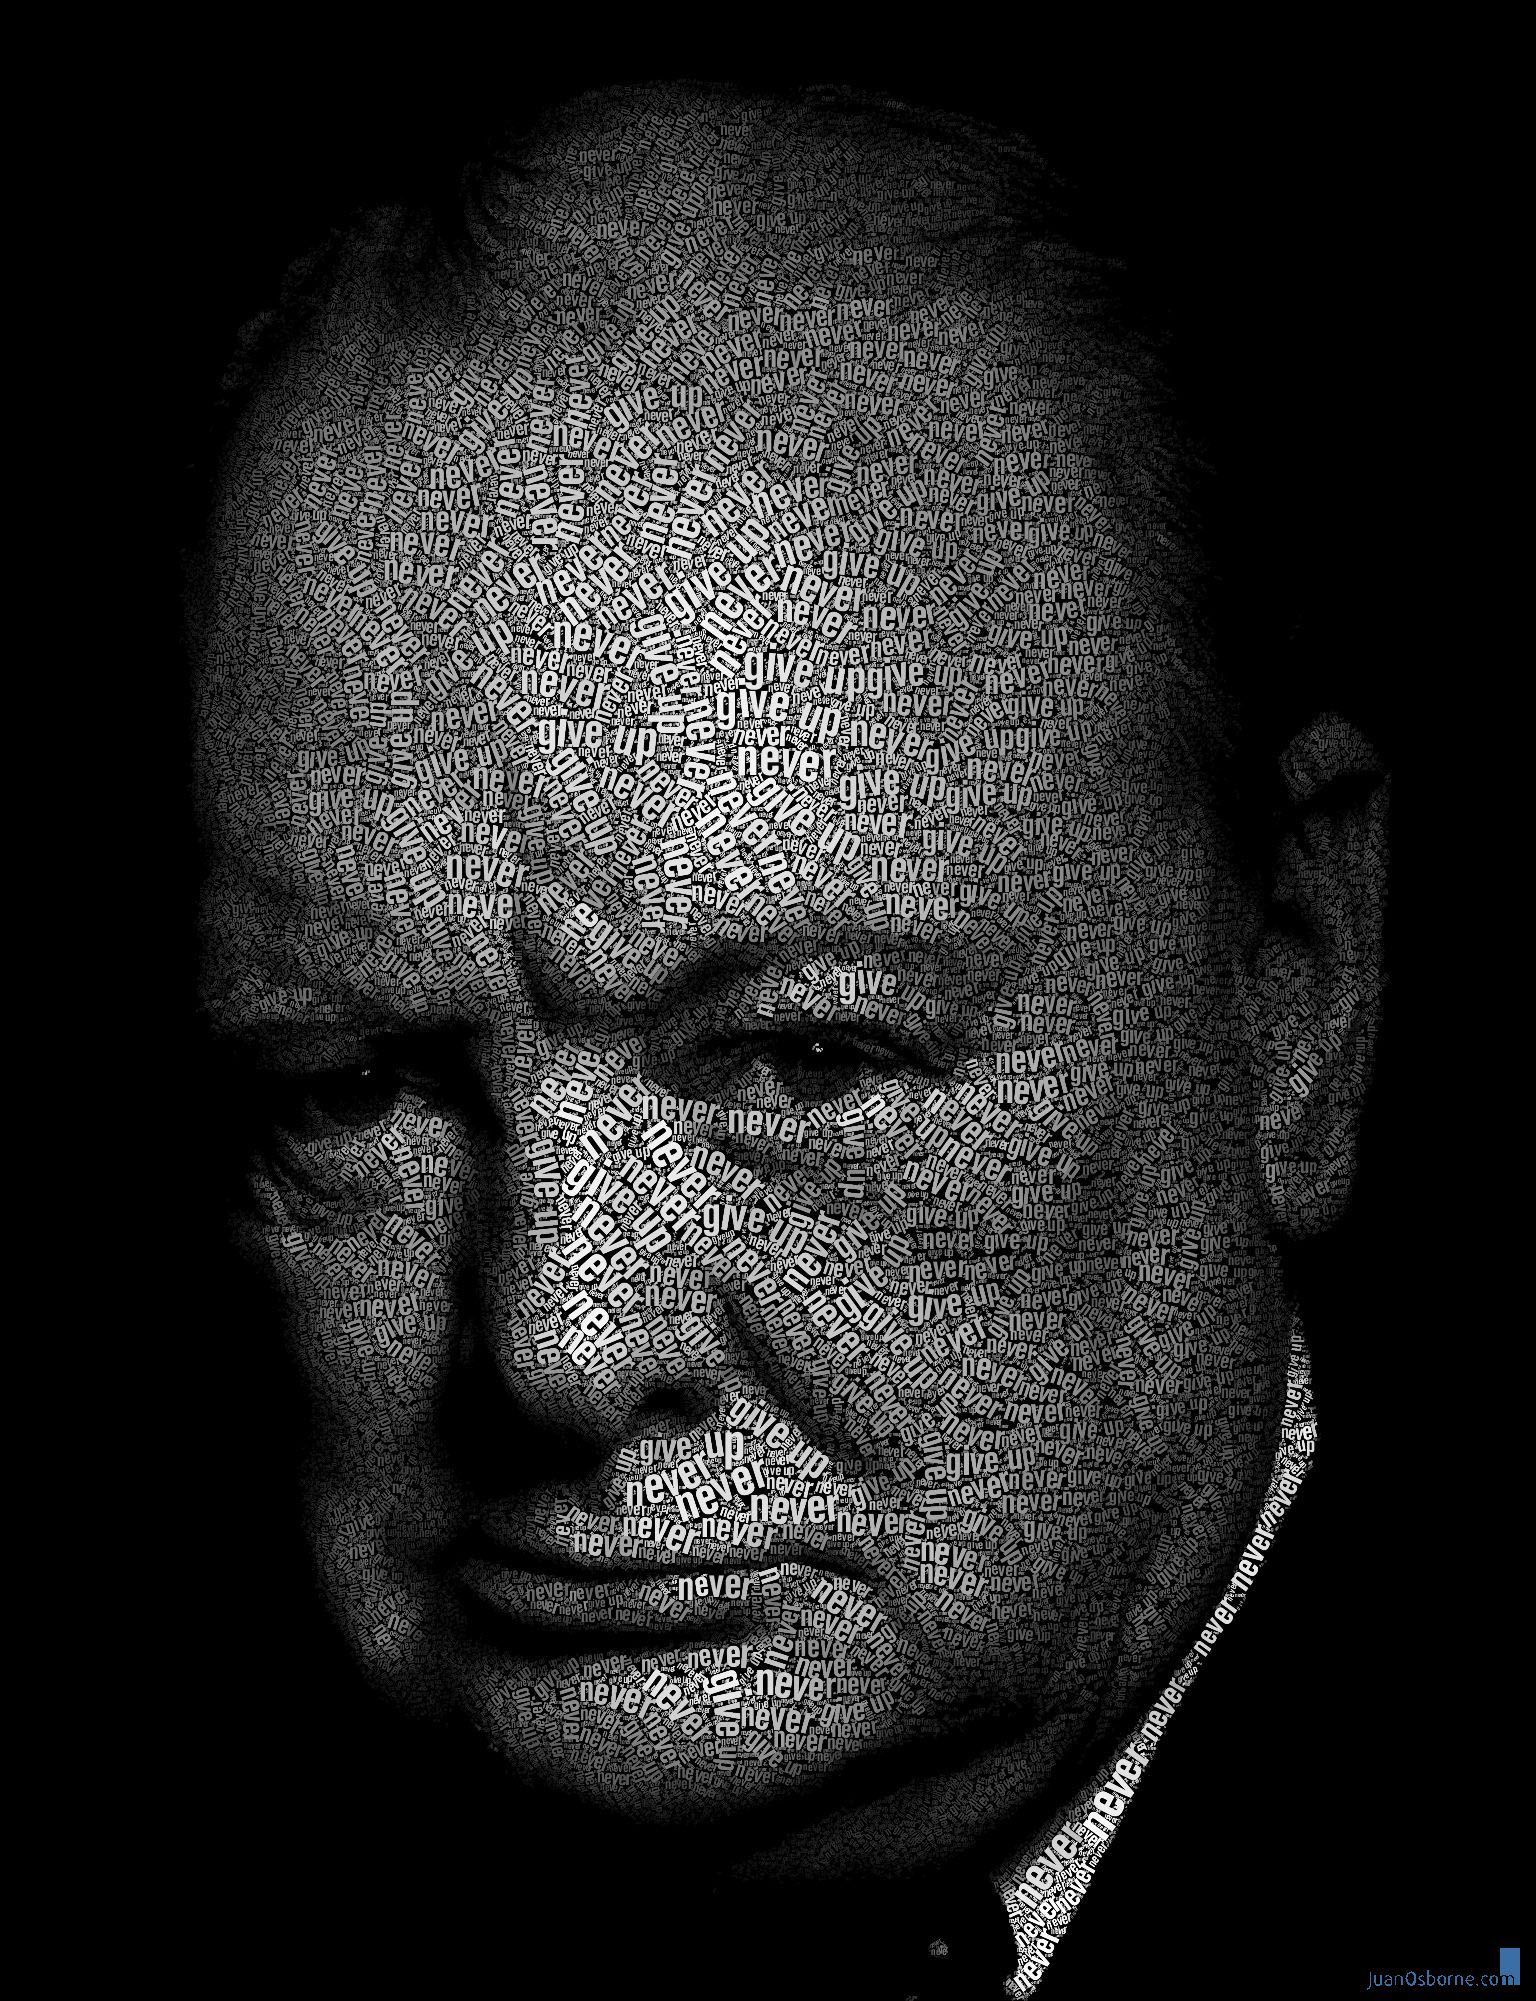 Never Give Up Winston Churchill Quotes Wallpaper. QuotesGram